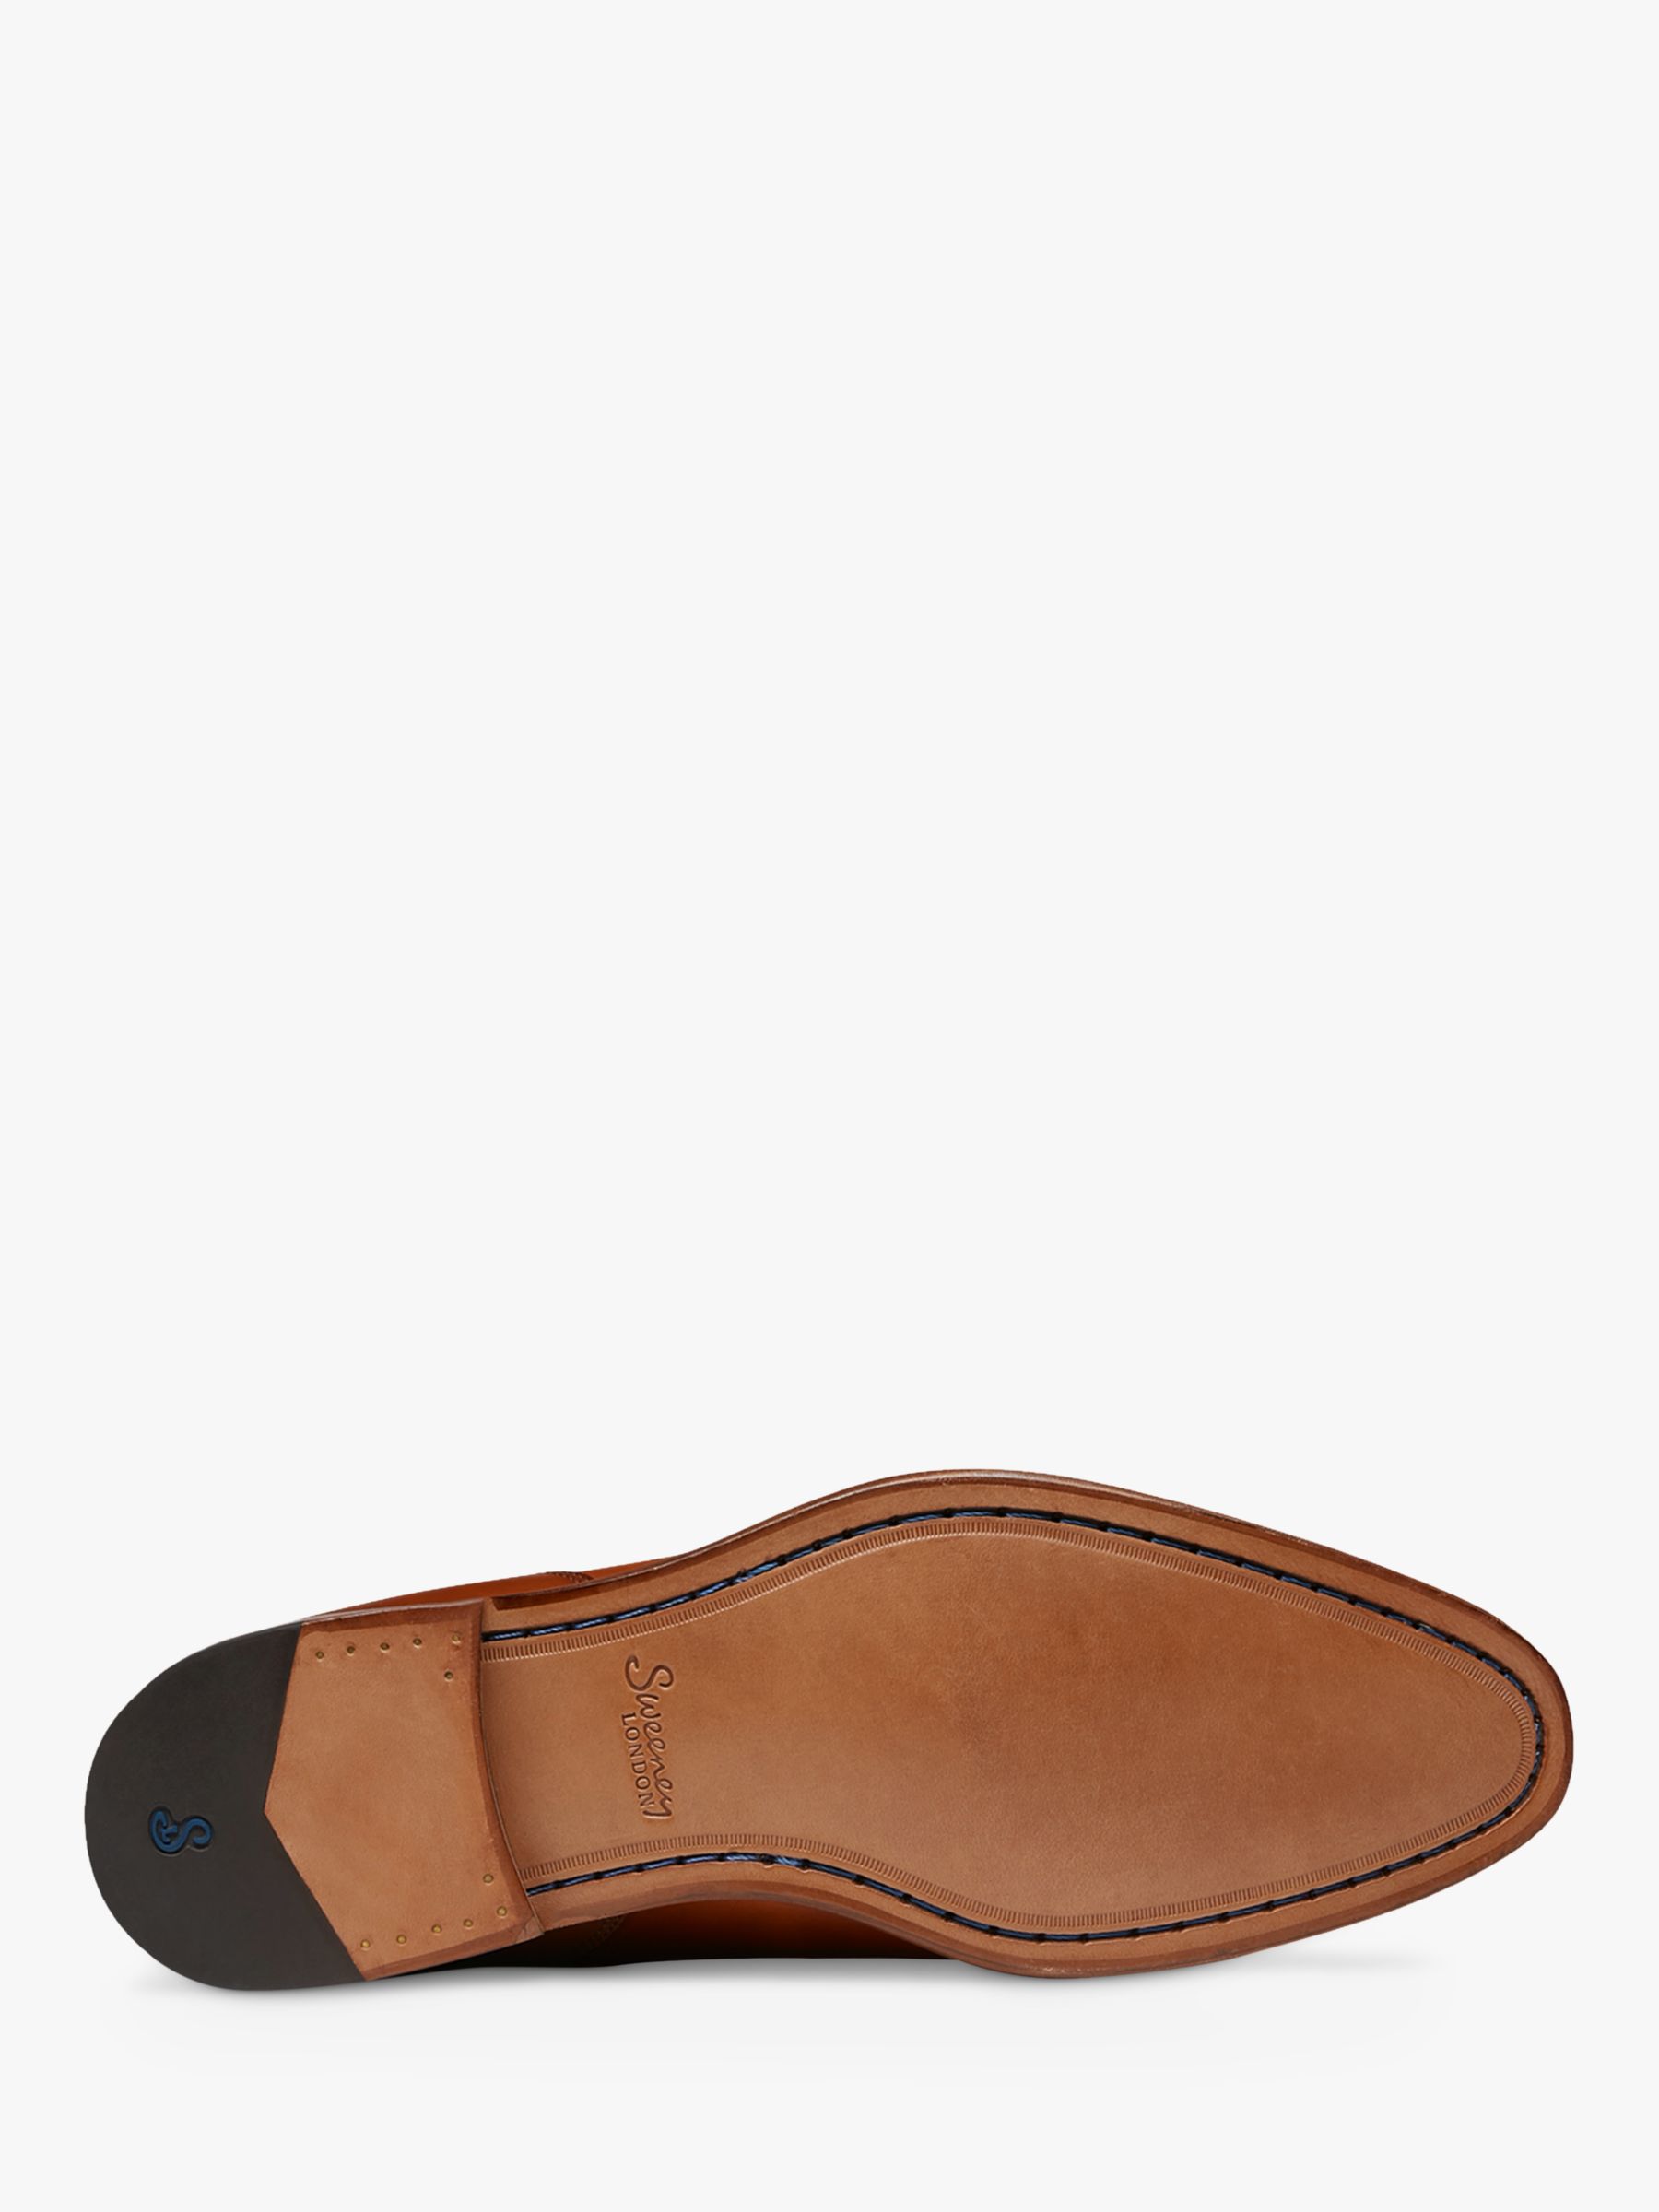 Buy Oliver Sweeney Mallory Oxford Shoes, Tan Online at johnlewis.com